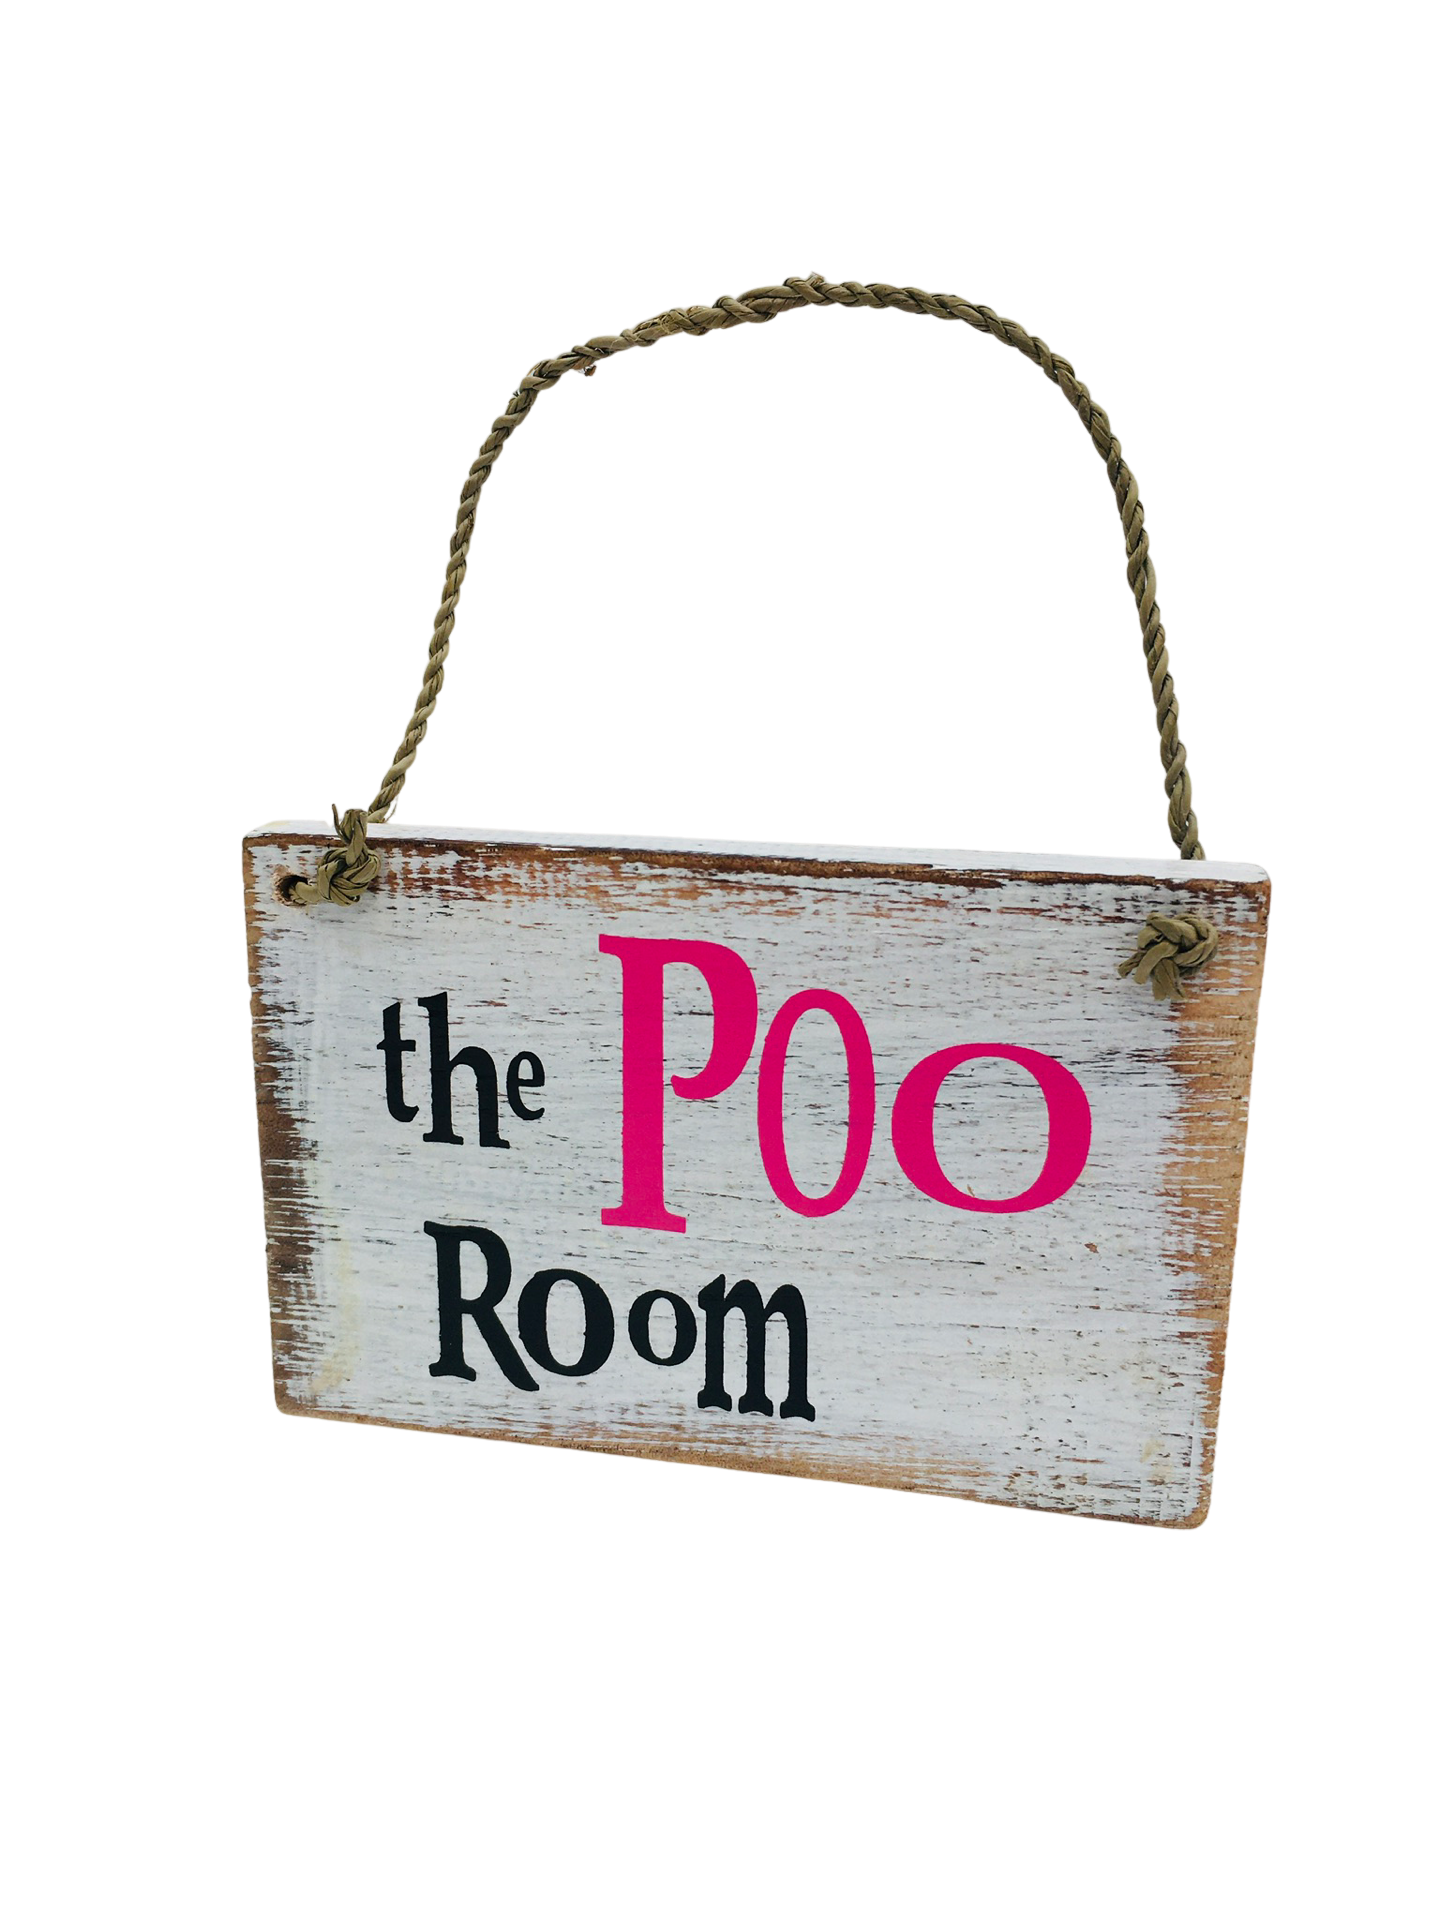 A small wooden sign that says 'The Poo Room".